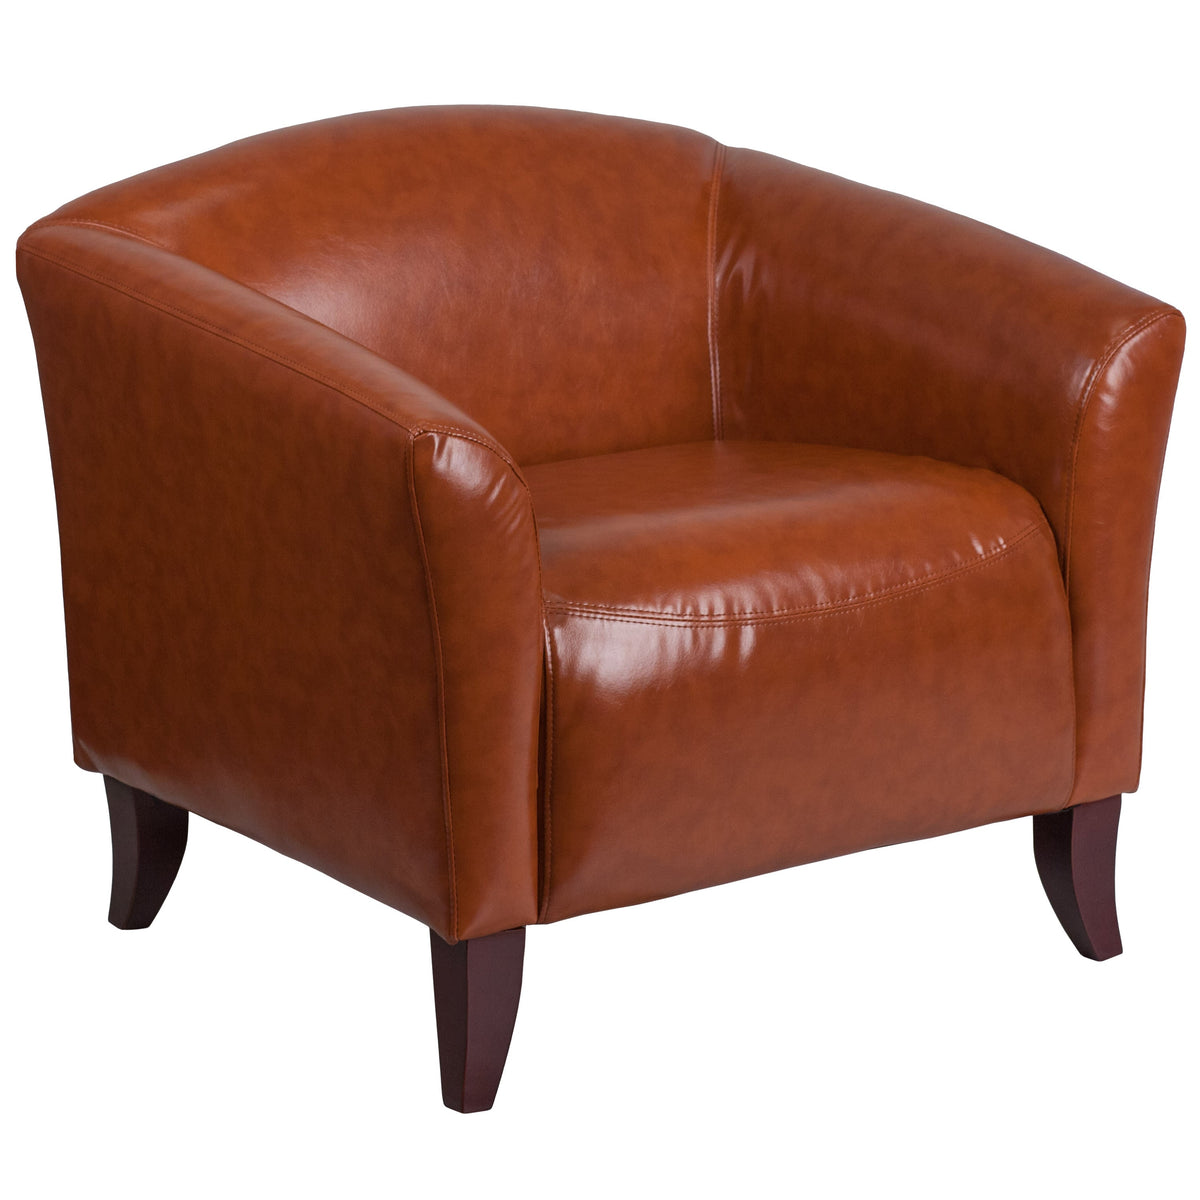 Cognac |#| Cognac LeatherSoft Chair with Cherry Wood Feet - Lobby & Guest Seating